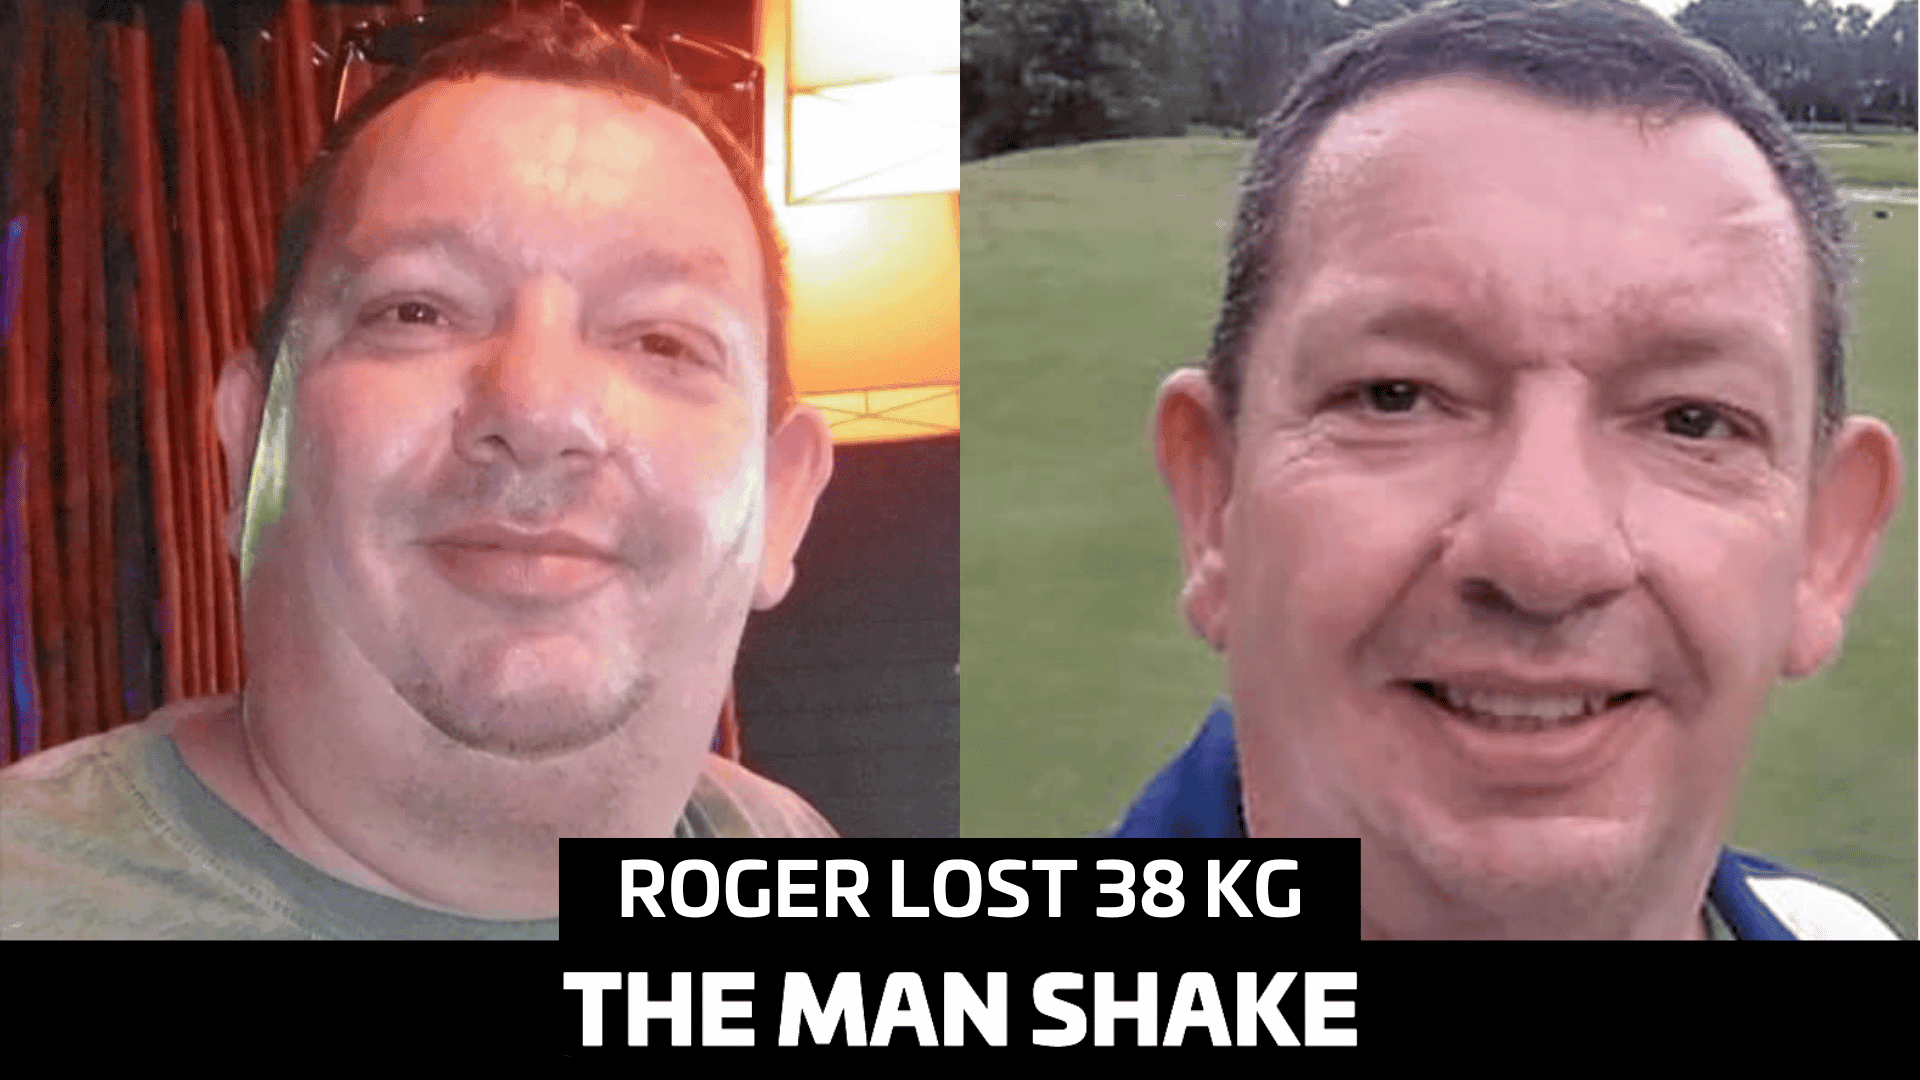 Roger lost 38kg and found his confidence!